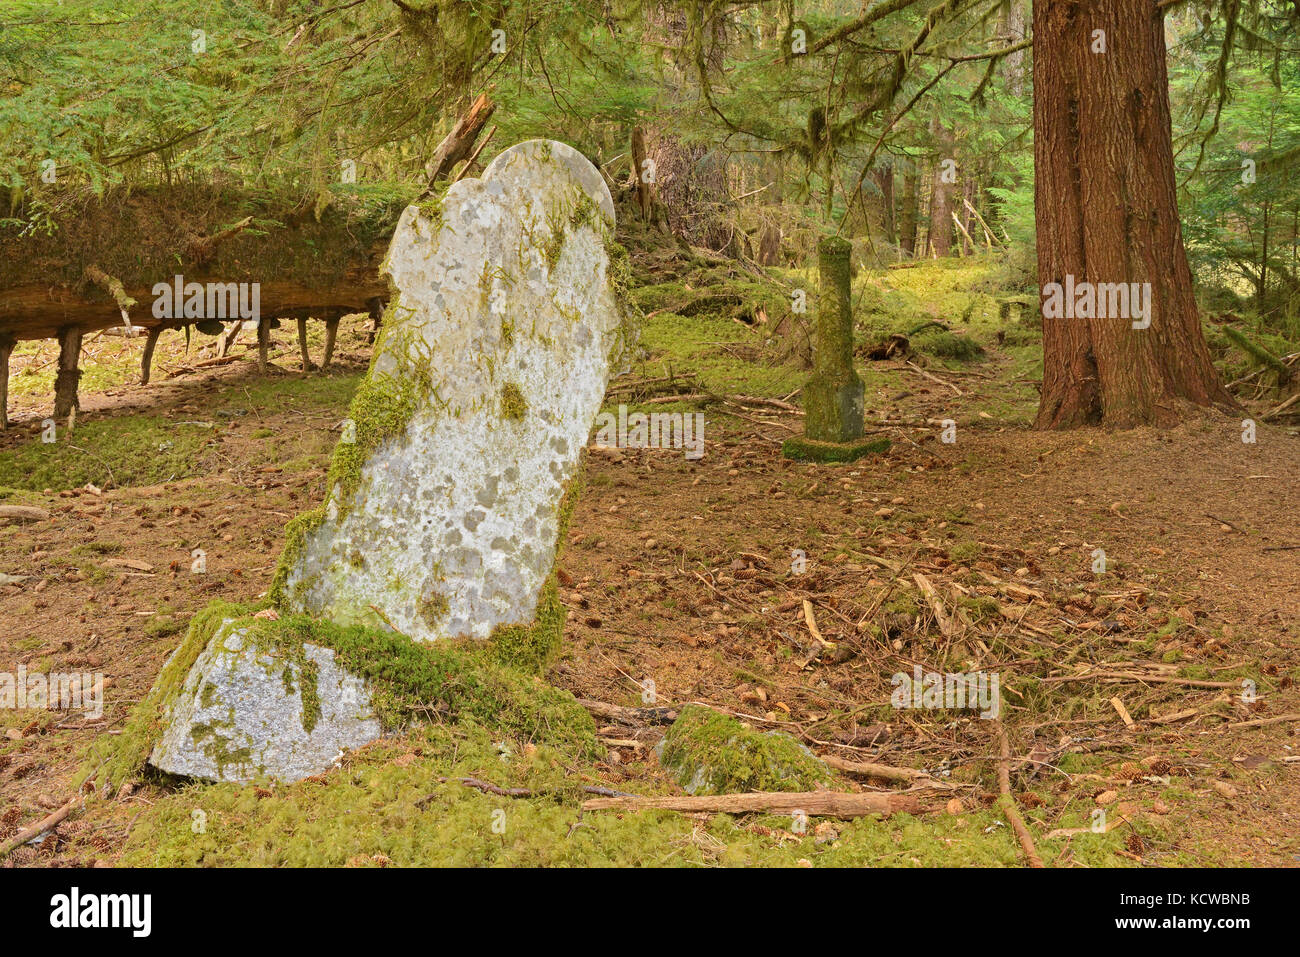 Pre 1900 burials at Mathers Creek on Louise Island, Haida Gwaii. thought to be of persons who had lived in the village of Clue. After this era the Clue inhabitants relocated to Skidegate, British Columbia., Haida Gwaii (formerly the Queen Charlotte Islands), British Columbia, Canada Stock Photo